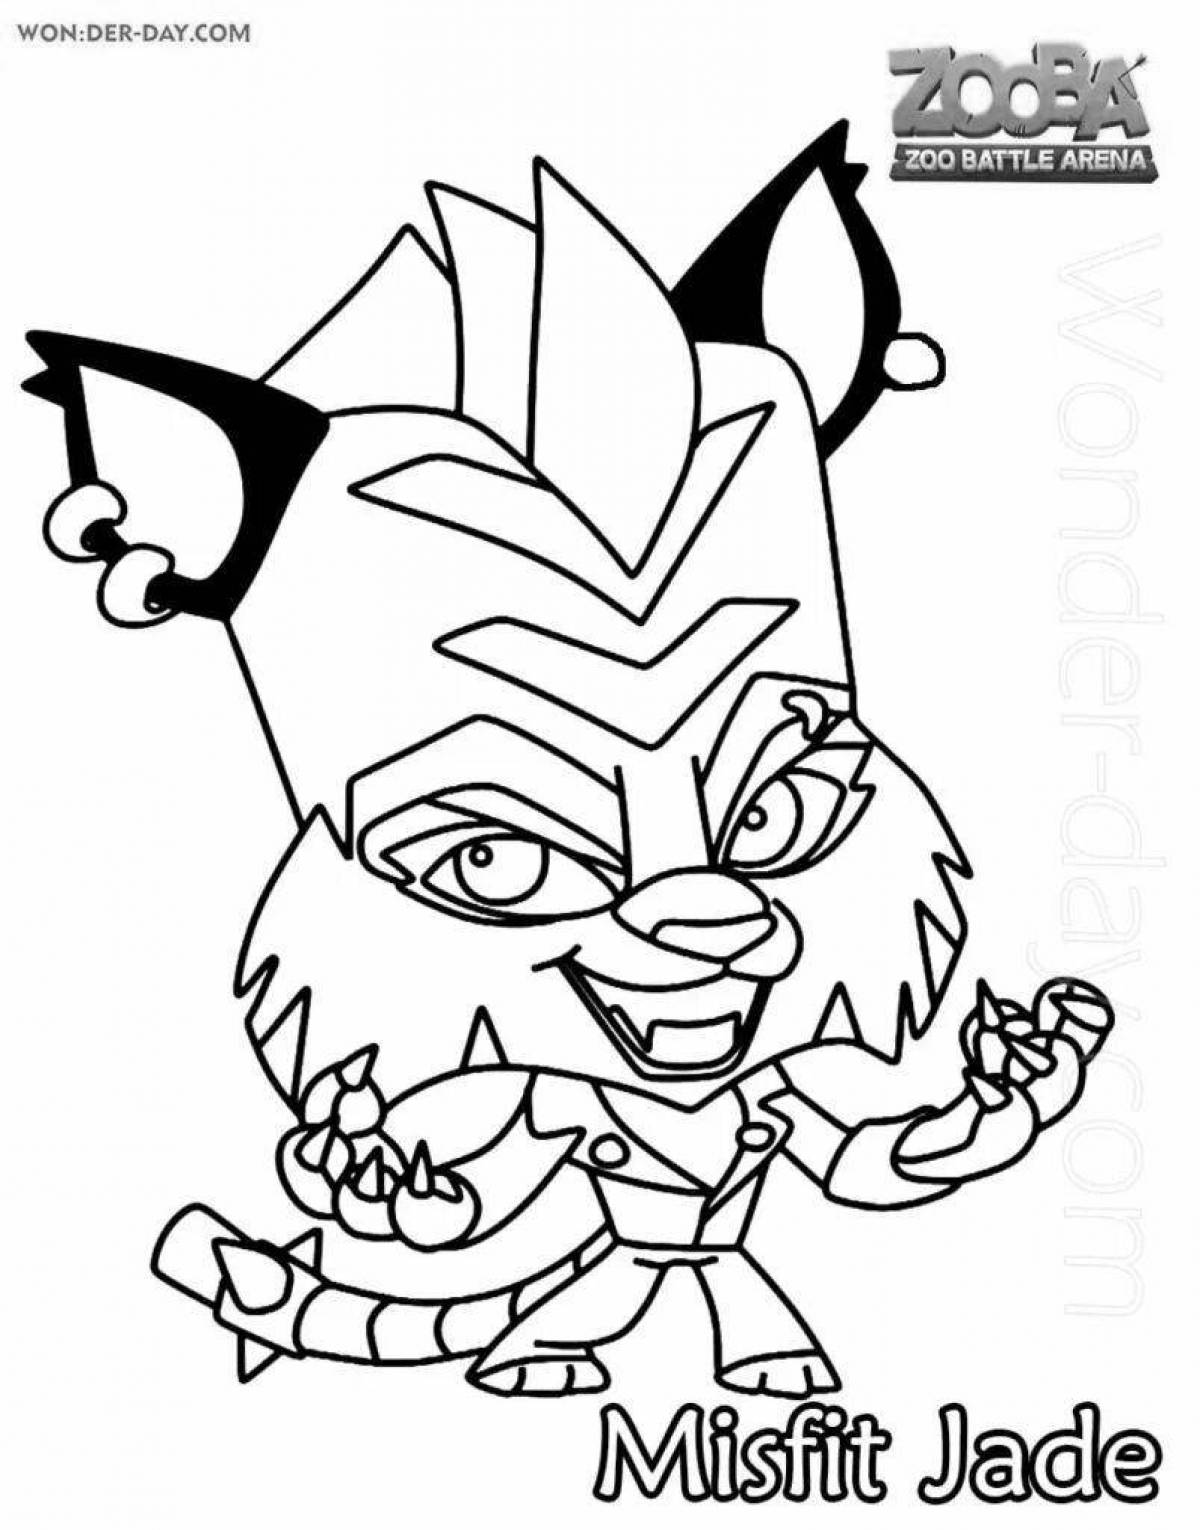 Colorful teeth coloring page